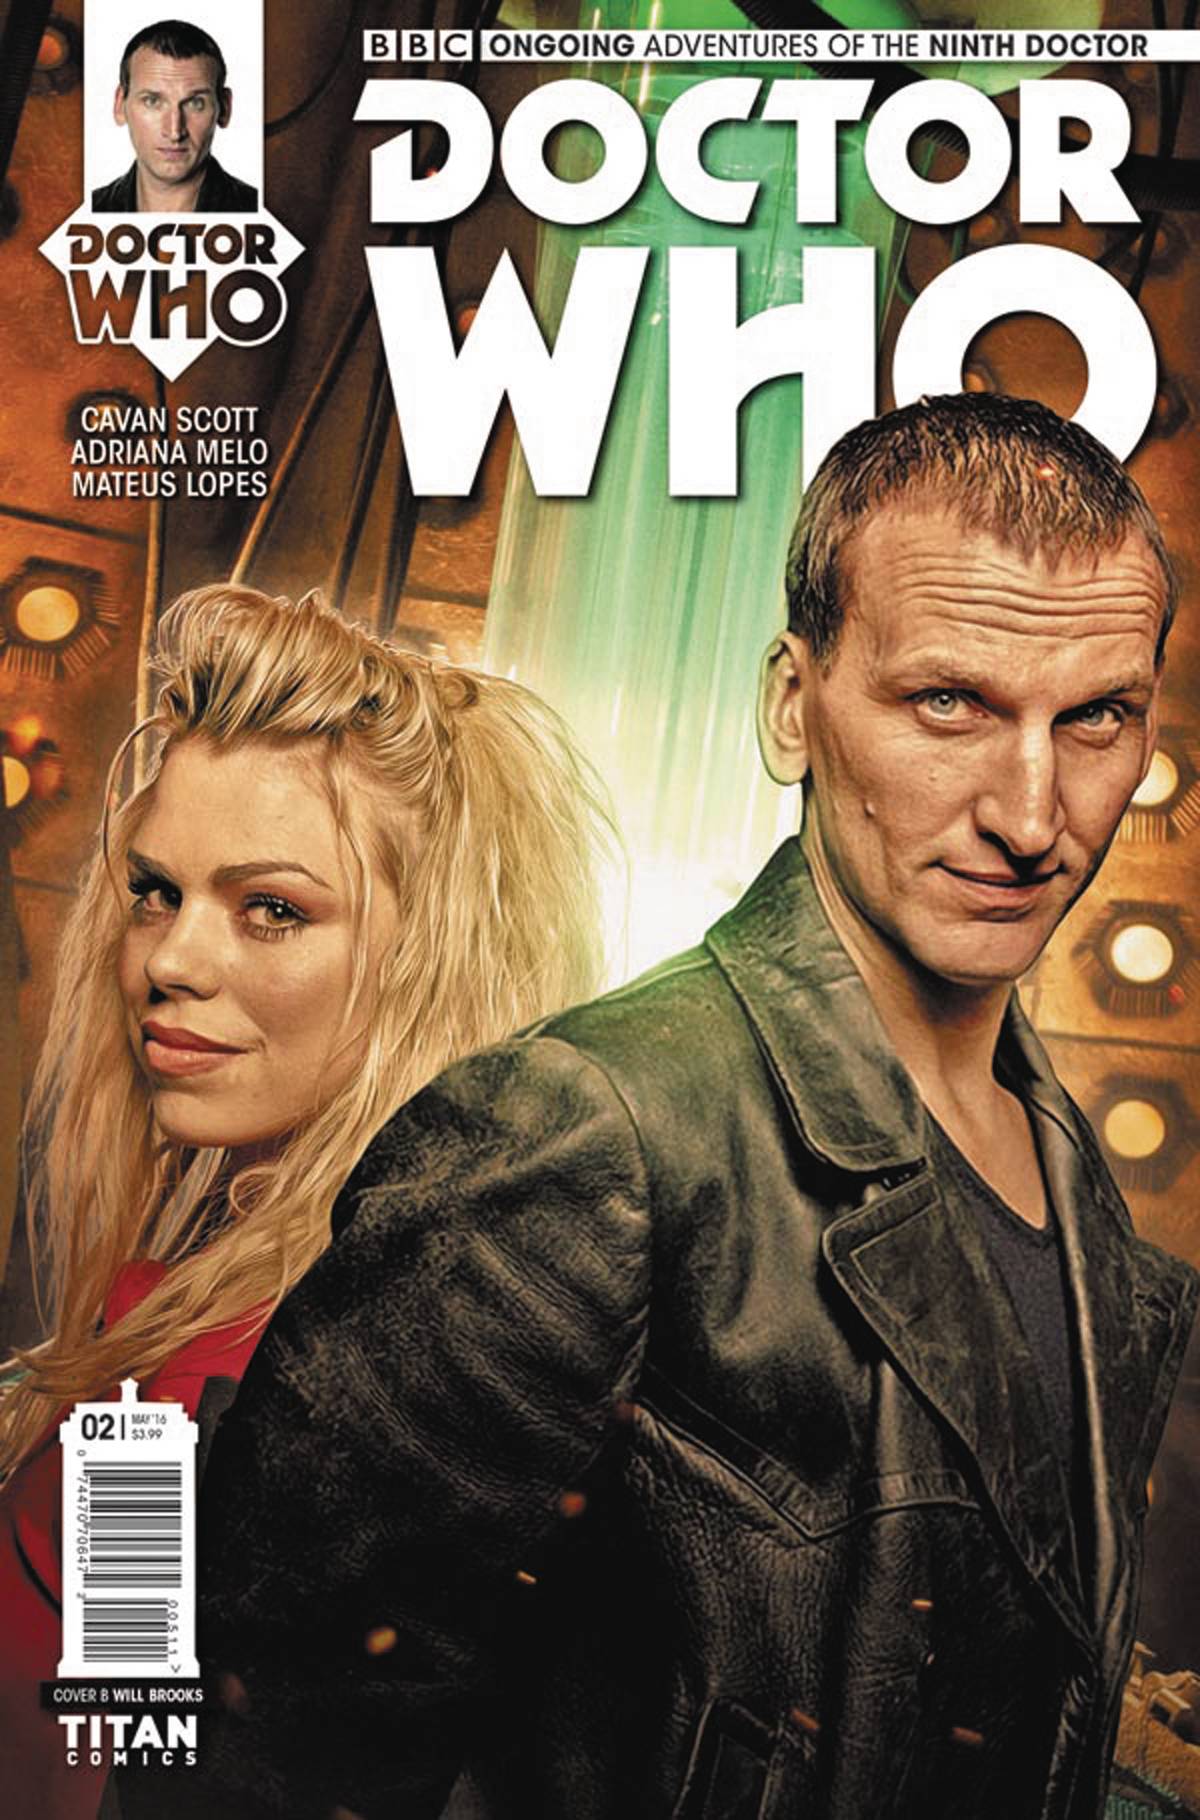 Doctor Who 9th #2 Cover B Photo